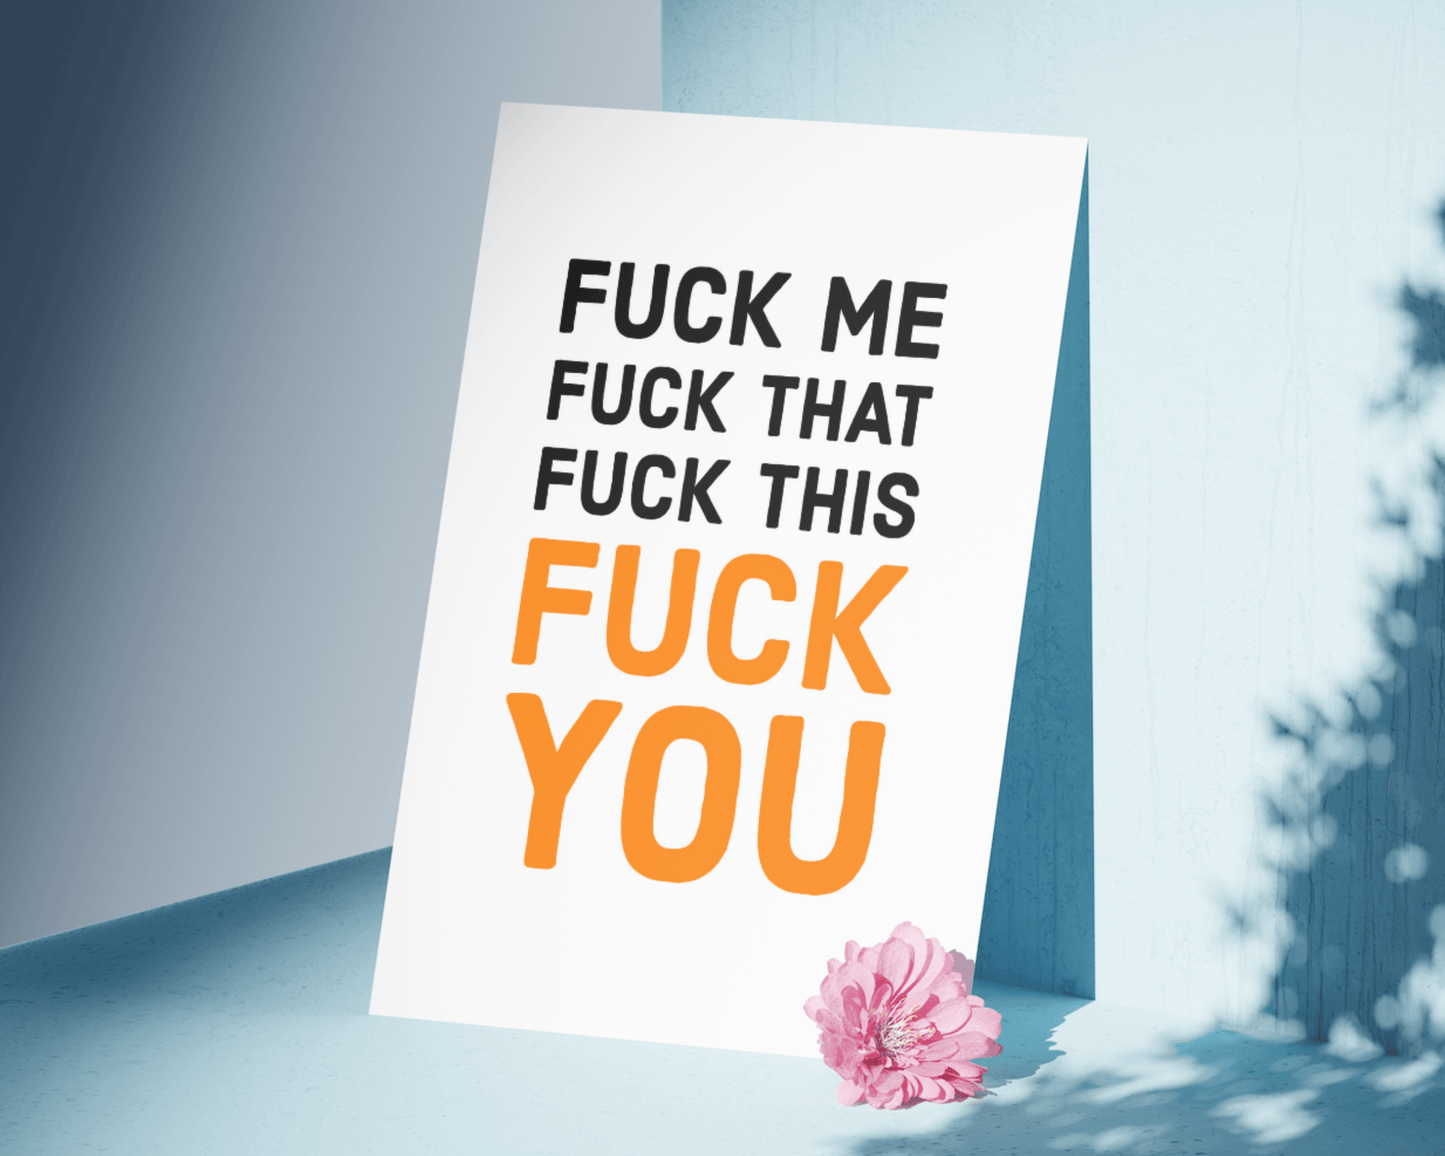 Fuck Me, Fuck That, Fuck This, Fuck You Funny Wall Print Prints Moments That Unite